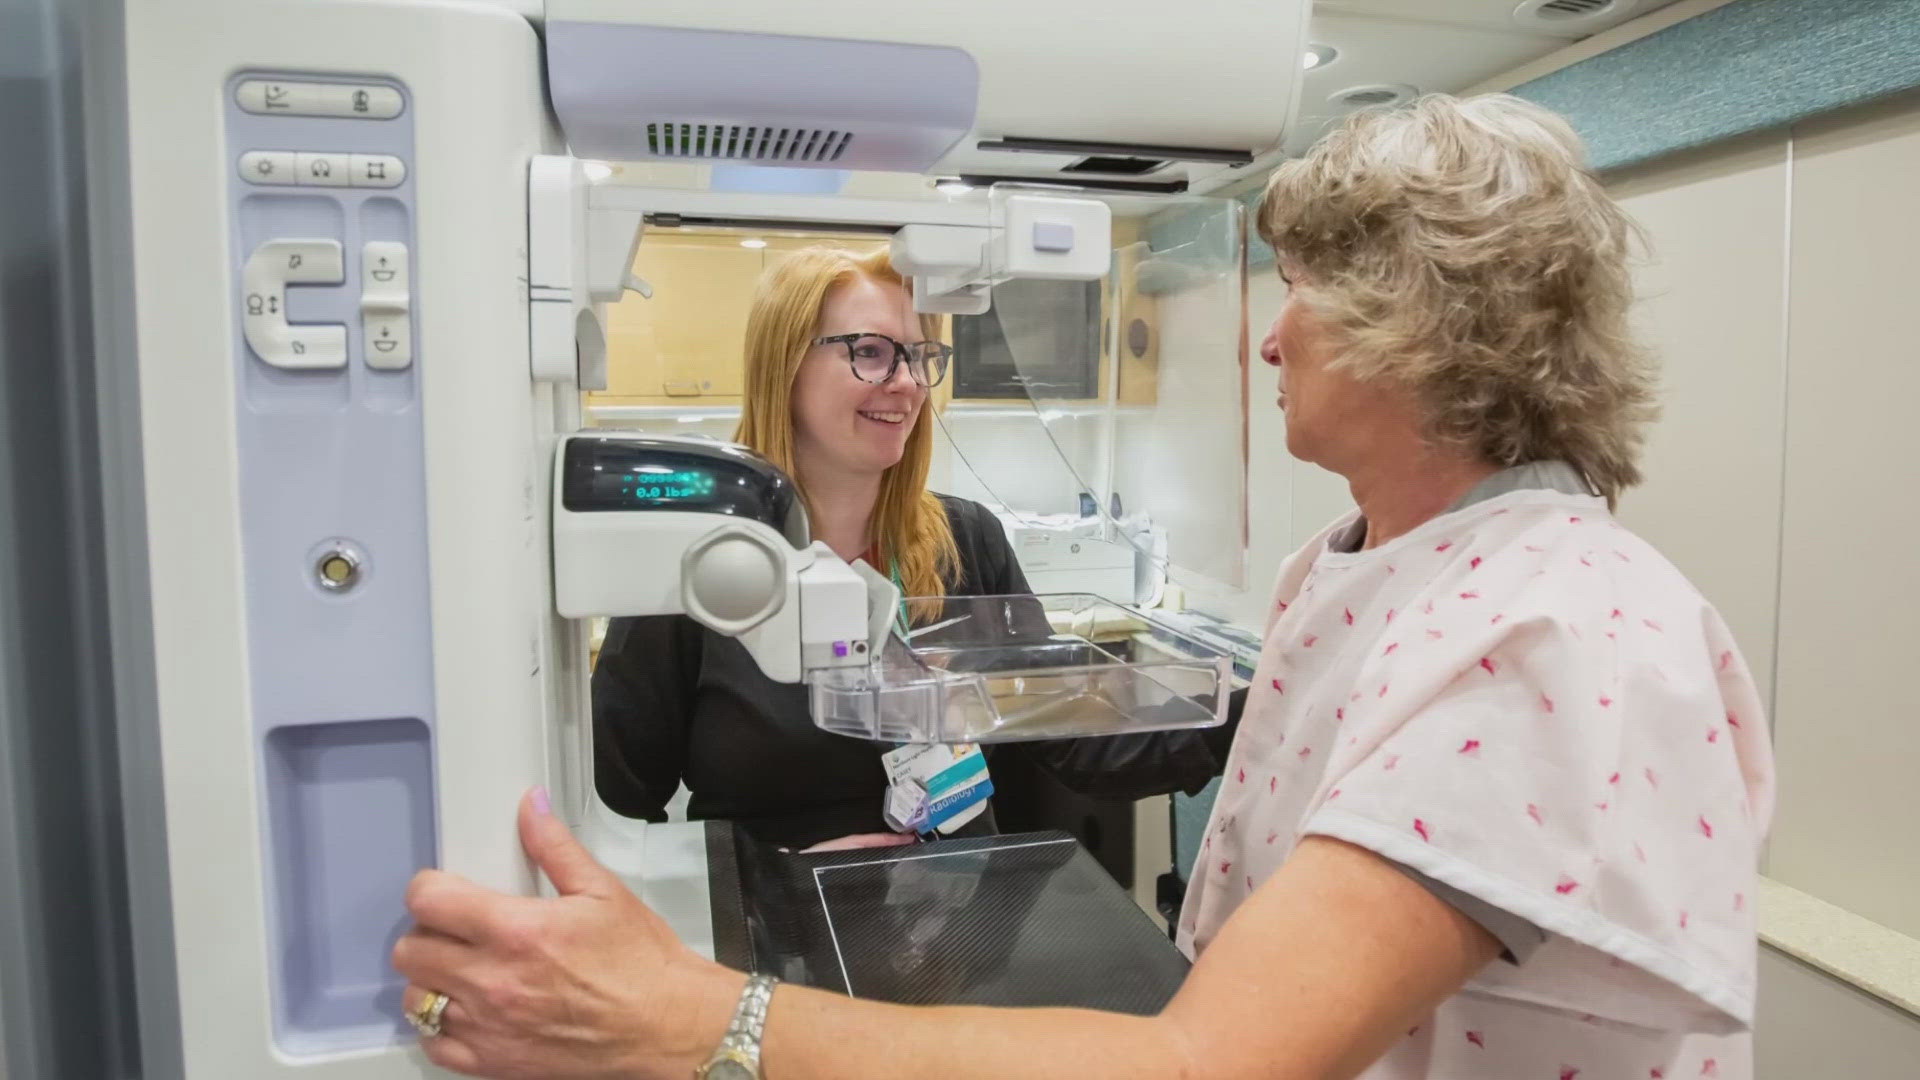 Northern Light CA Dean Hospital in Greenville launched a new mobile mammography service that will expand to other areas of the state this summer.